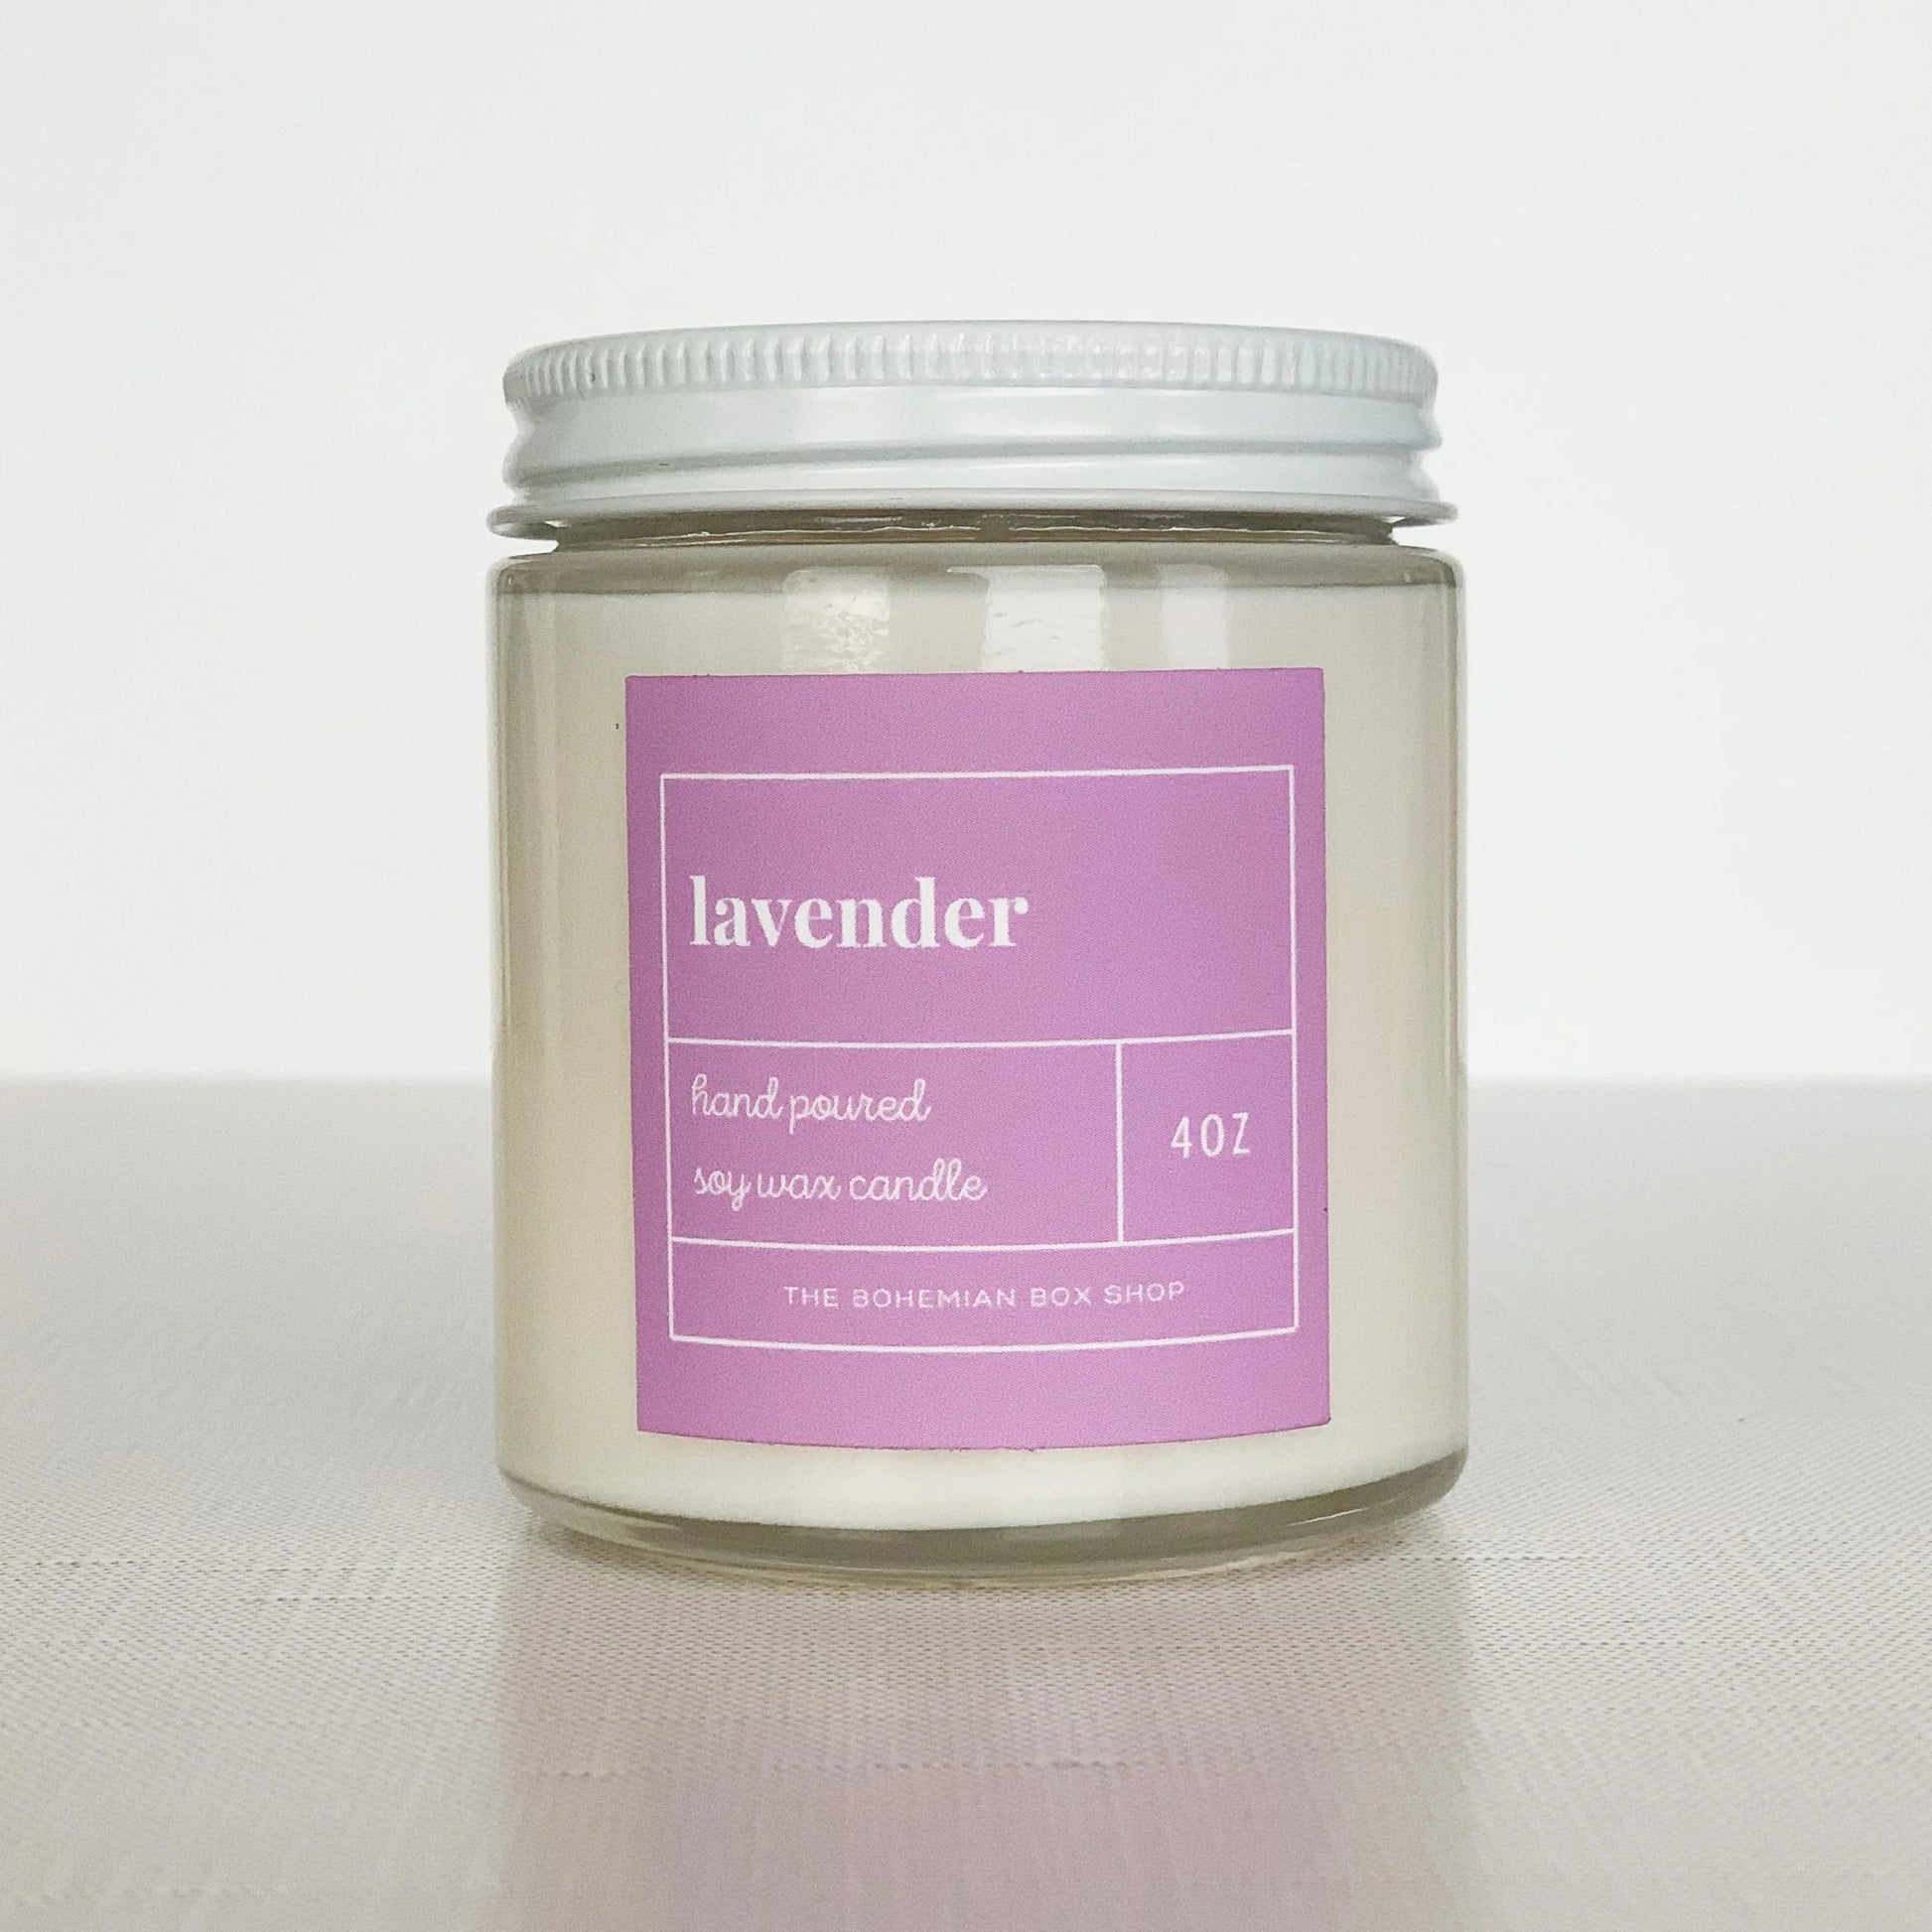 4 ounce lavender soy candle with purple label, clear jar, and white lid.￼